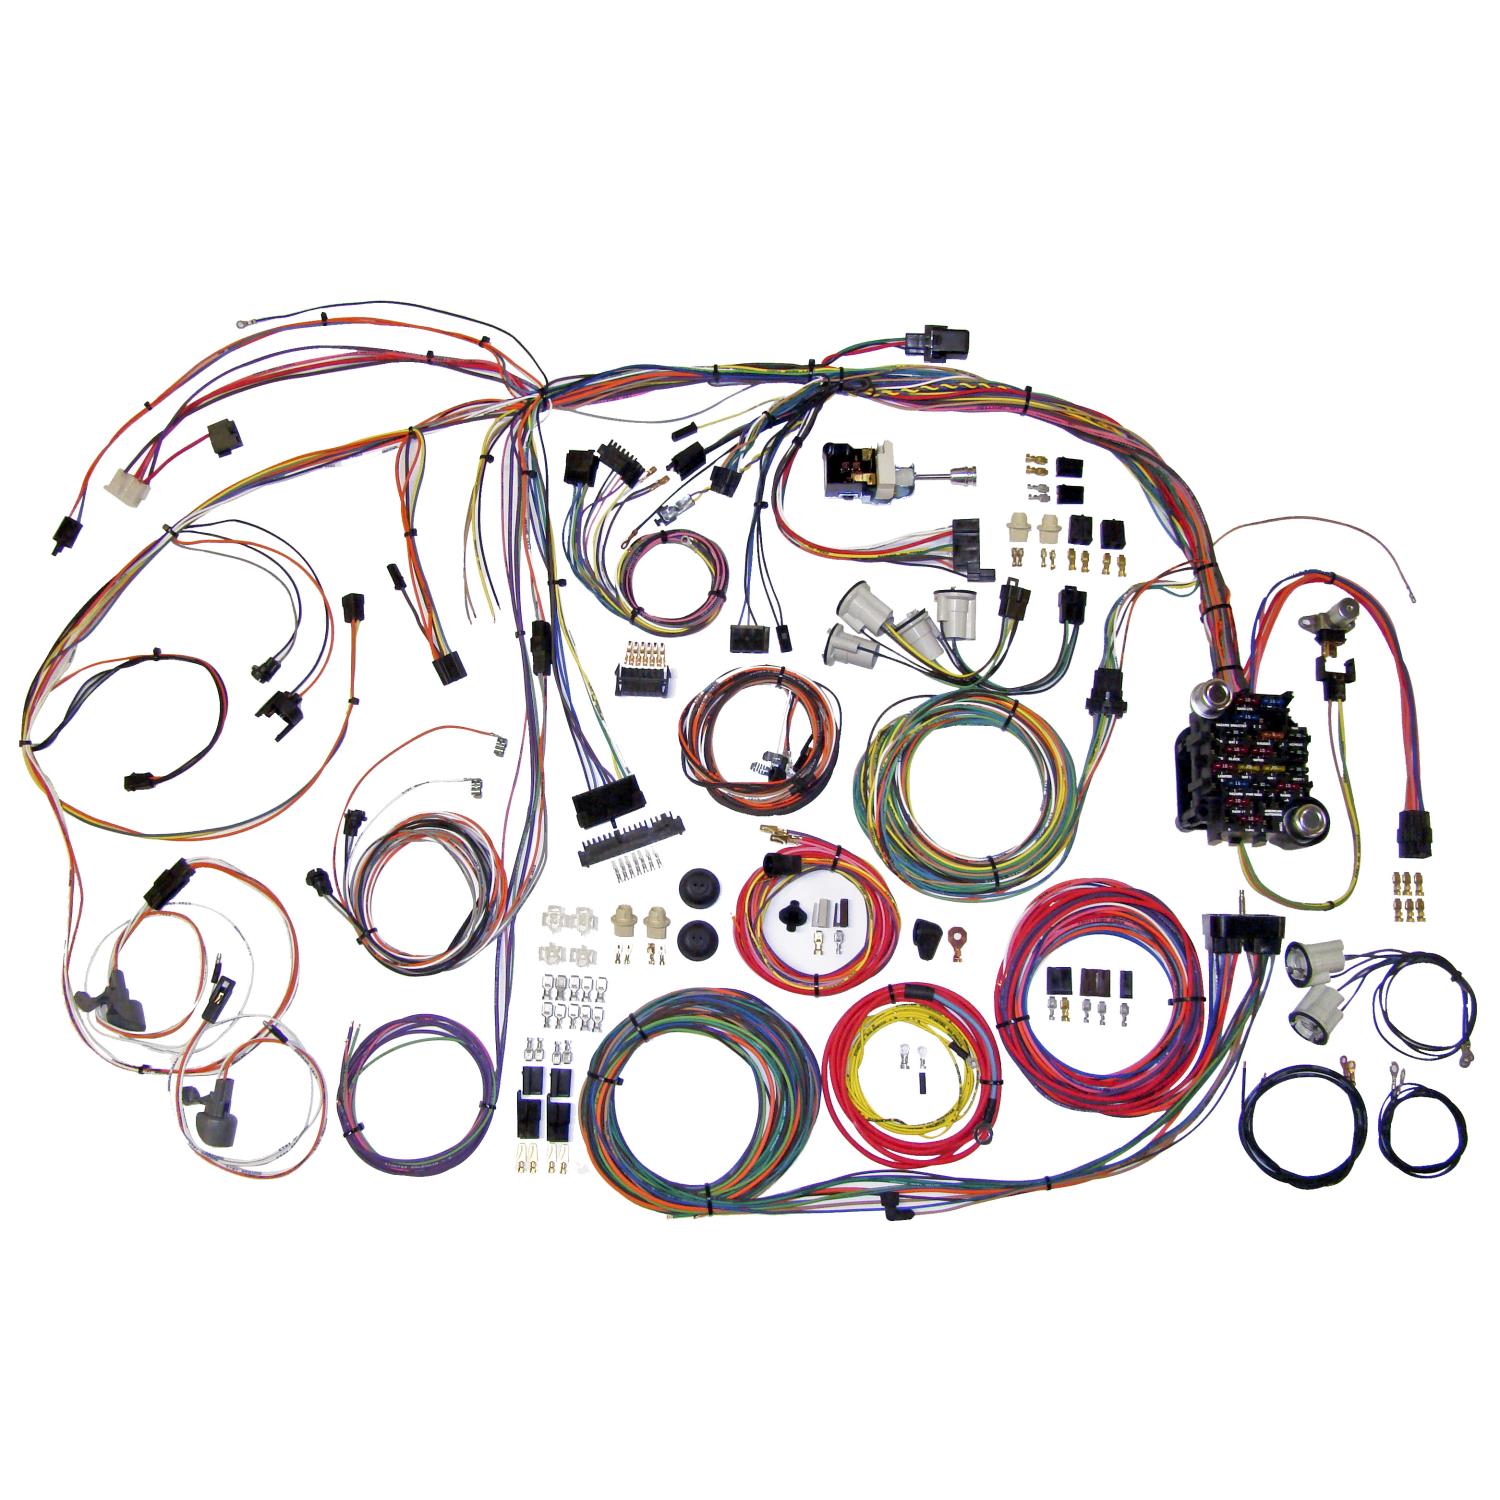 510105 Classic Update Wiring Kit 1970-1972 Chevy Chevelle